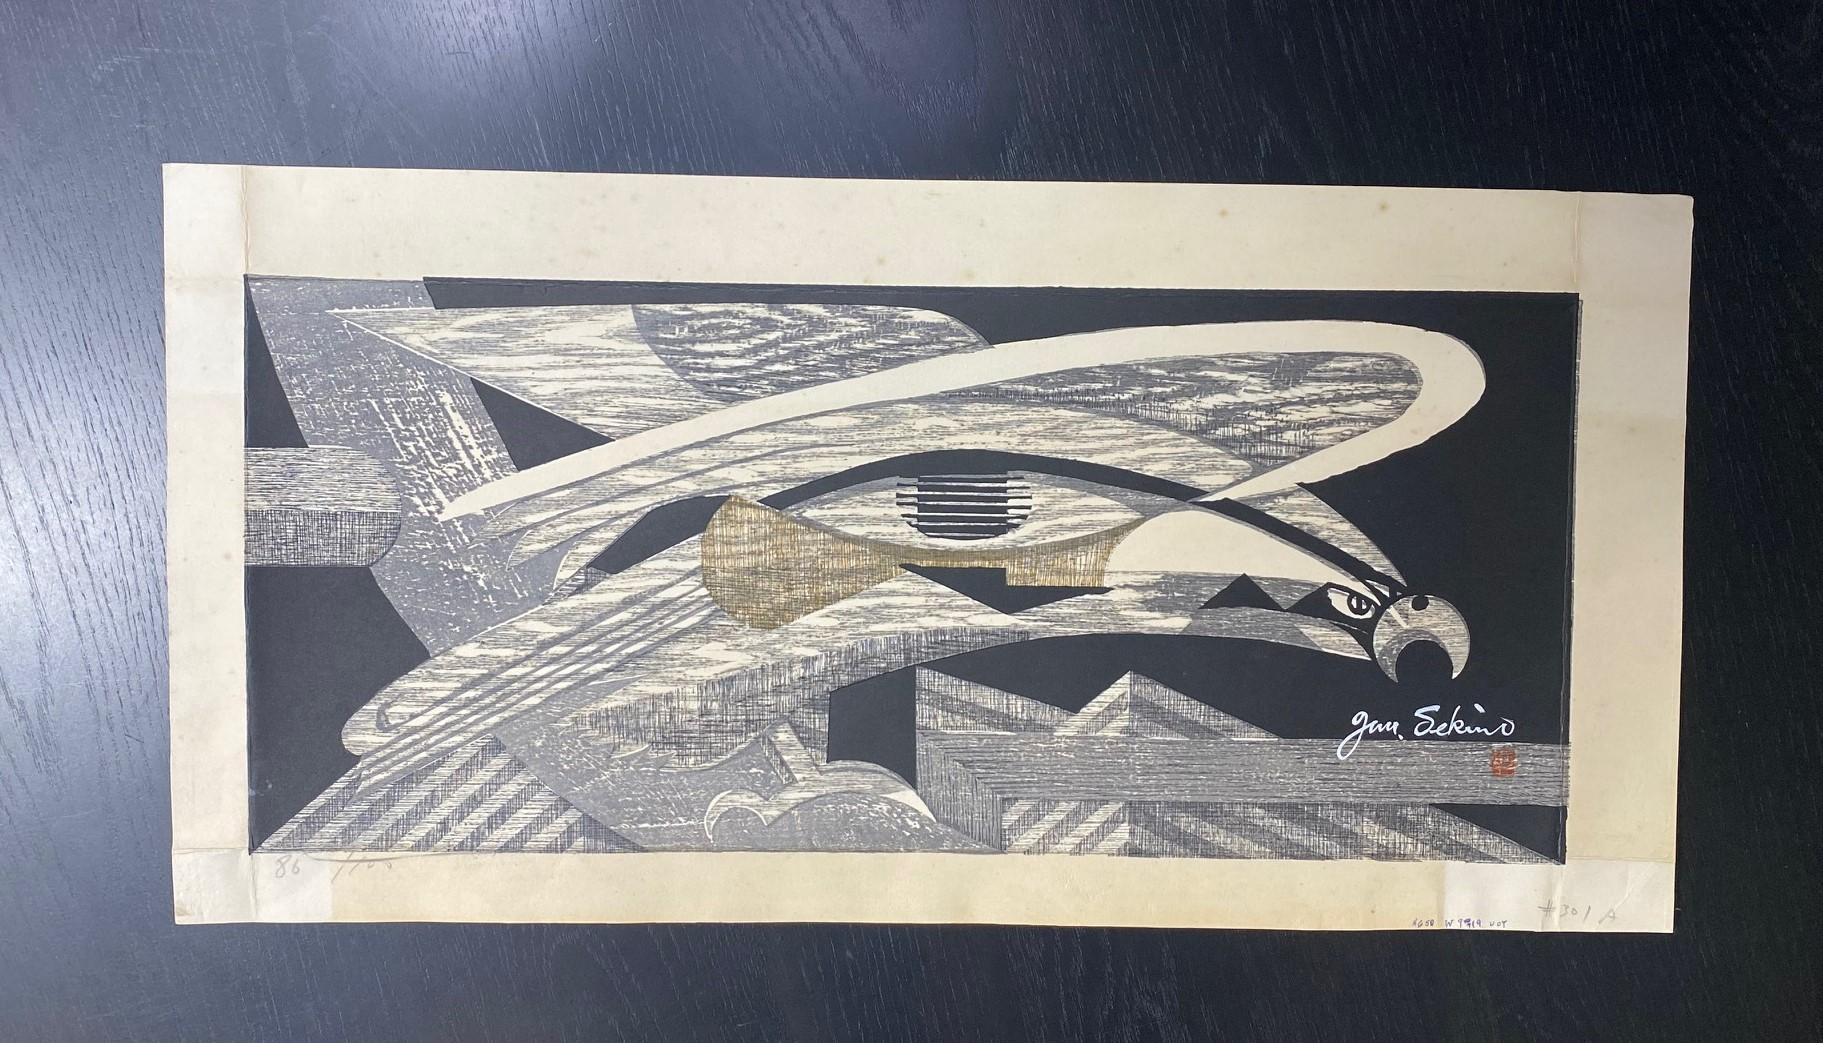 A bold abstract limited edition woodblock print by famed Japanese artist/printmaker Junichiro Sekino featuring a fierce bird likely an eagle or hawk.  The wood grain of the printing blocks is quite wonderful in this work.  

The print is signed in